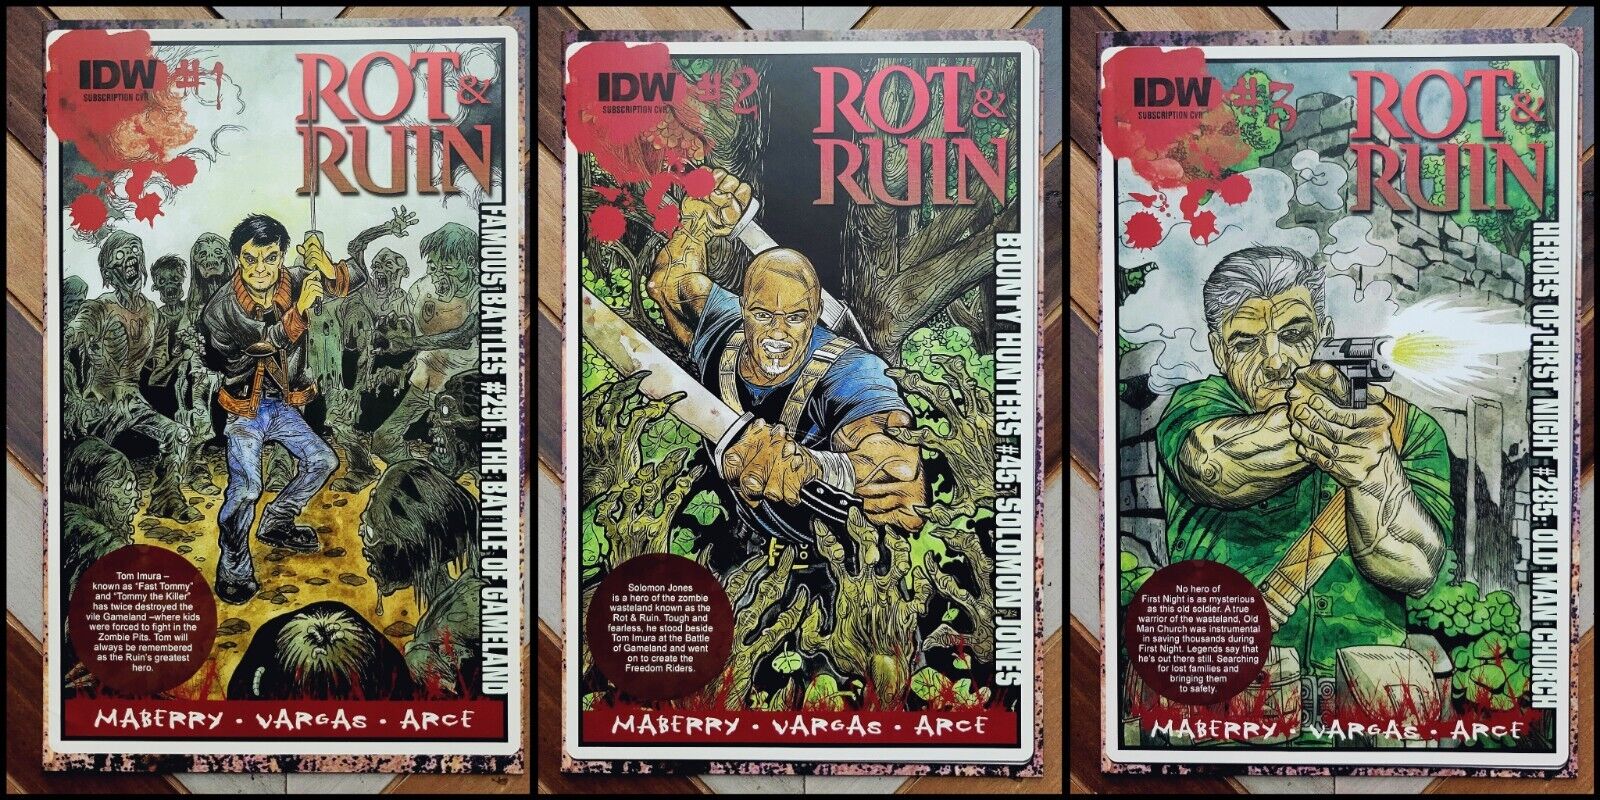 ROT & RUIN #1-3 (IDW 2014) High Grade Rob Sacchetto SUBSCRIPTION Covers Set of 3